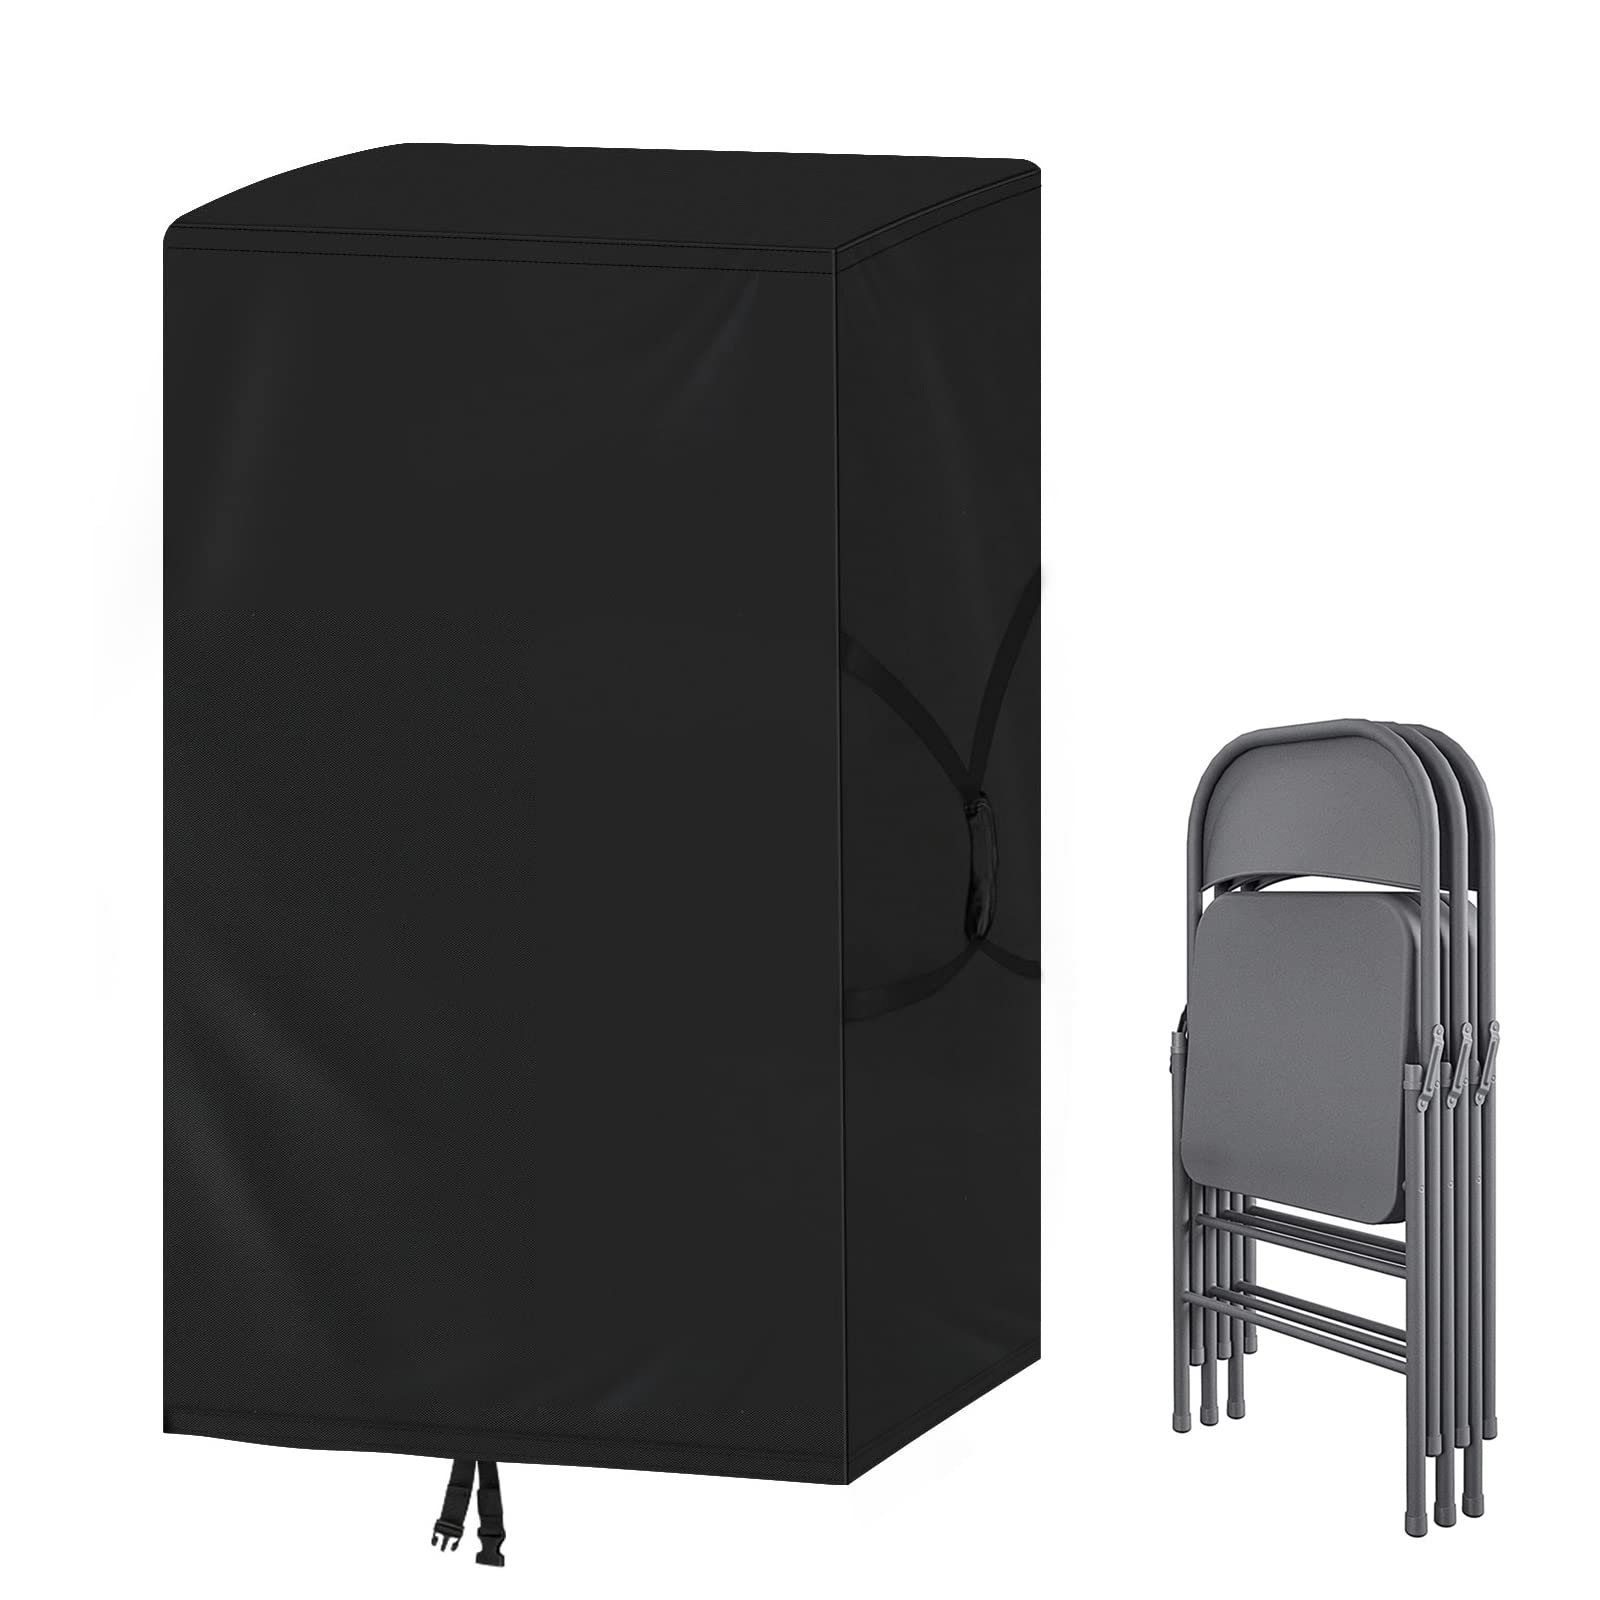 POMER Folding Chair Storage Bag for Plastic, Resin, and Wood Folding Chairs Waterproof Chair Cover with Handle for Chairs Storage and Transport - 20x12x39inch